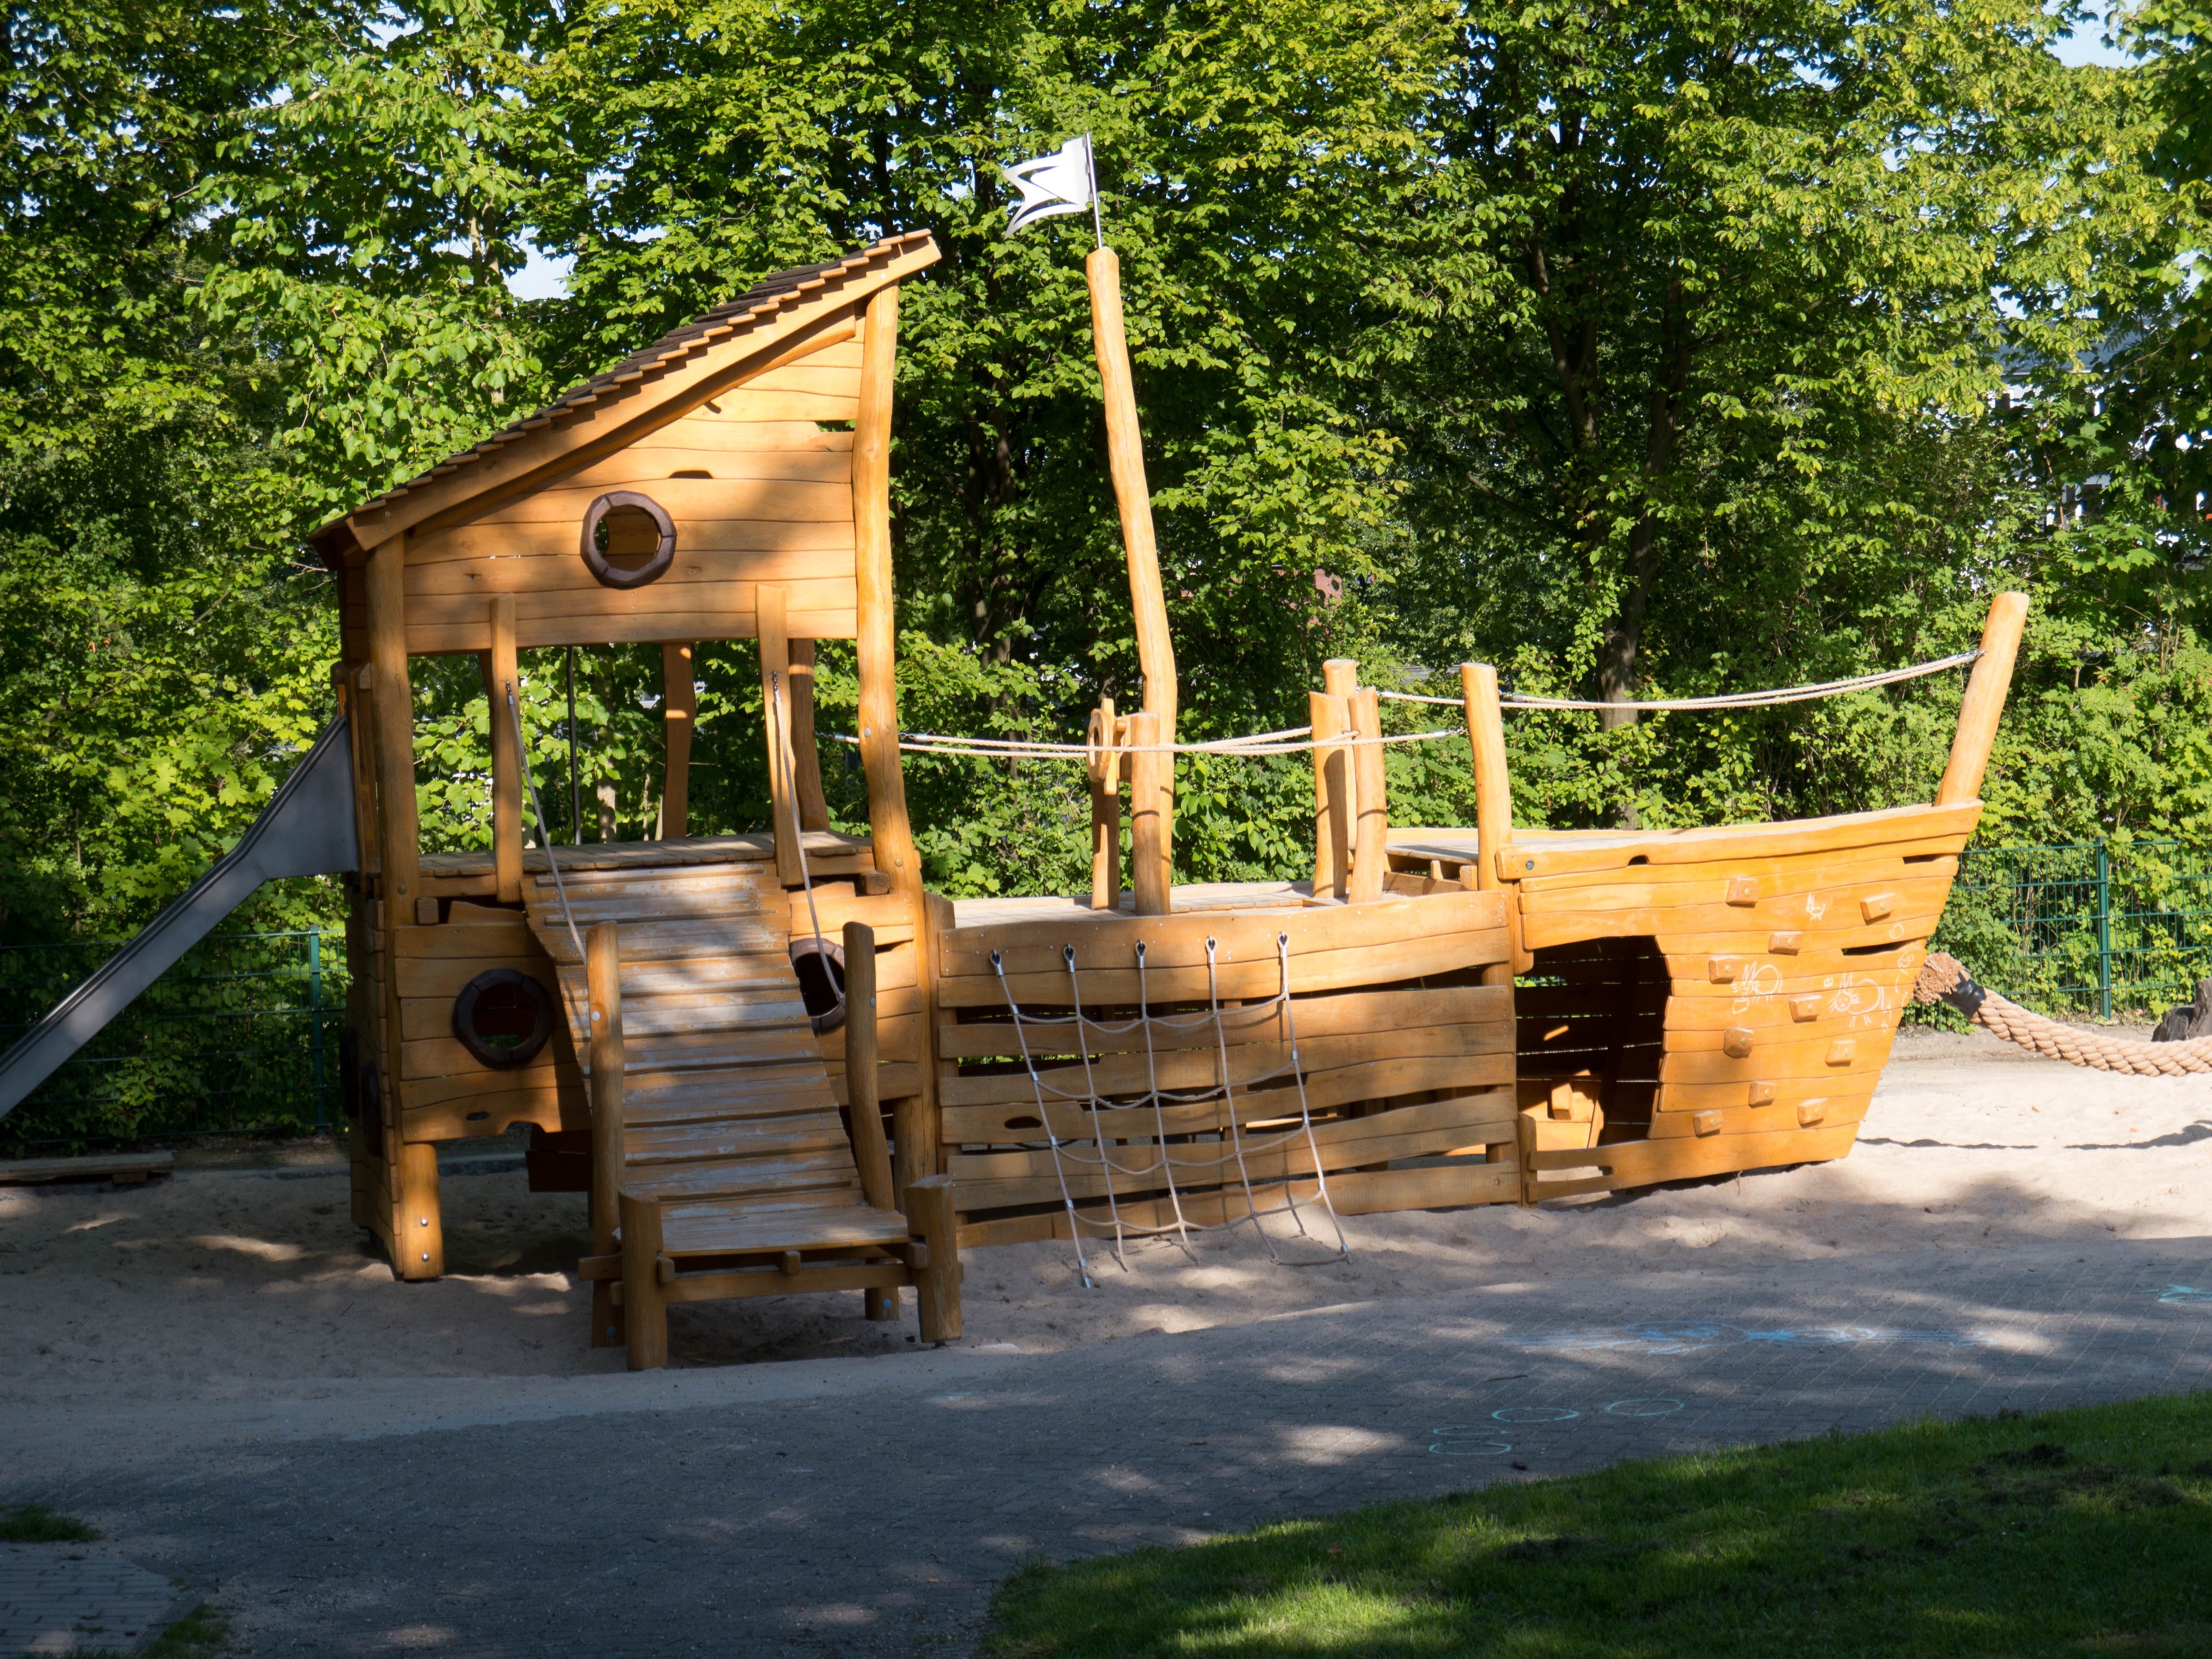 brown wooden ship playset beside trees